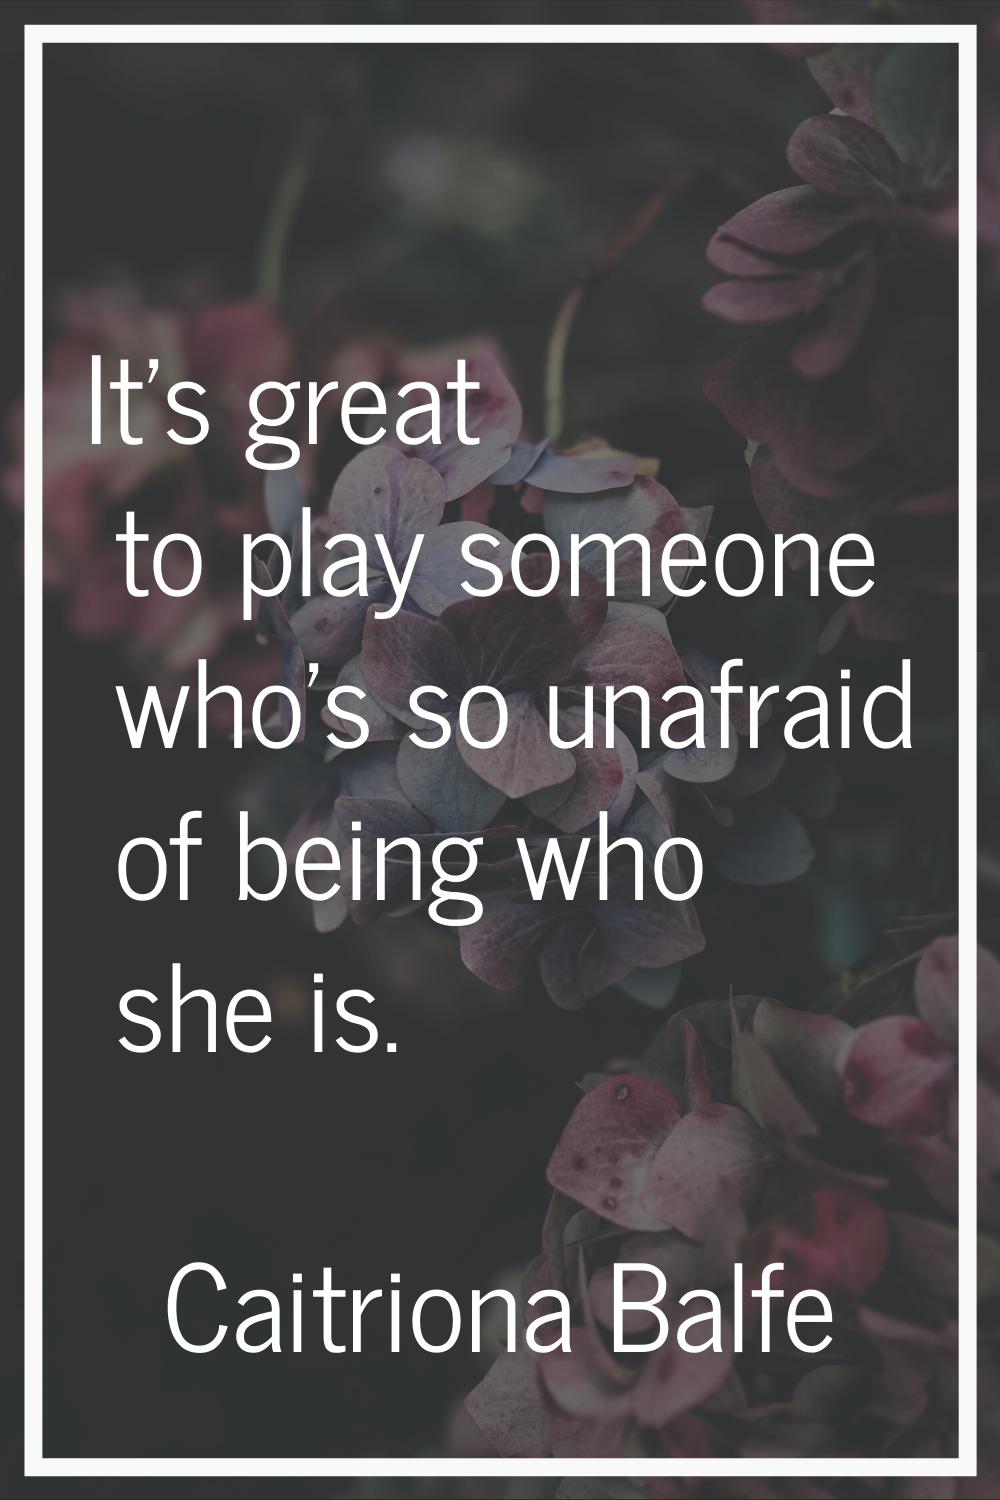 It's great to play someone who's so unafraid of being who she is.